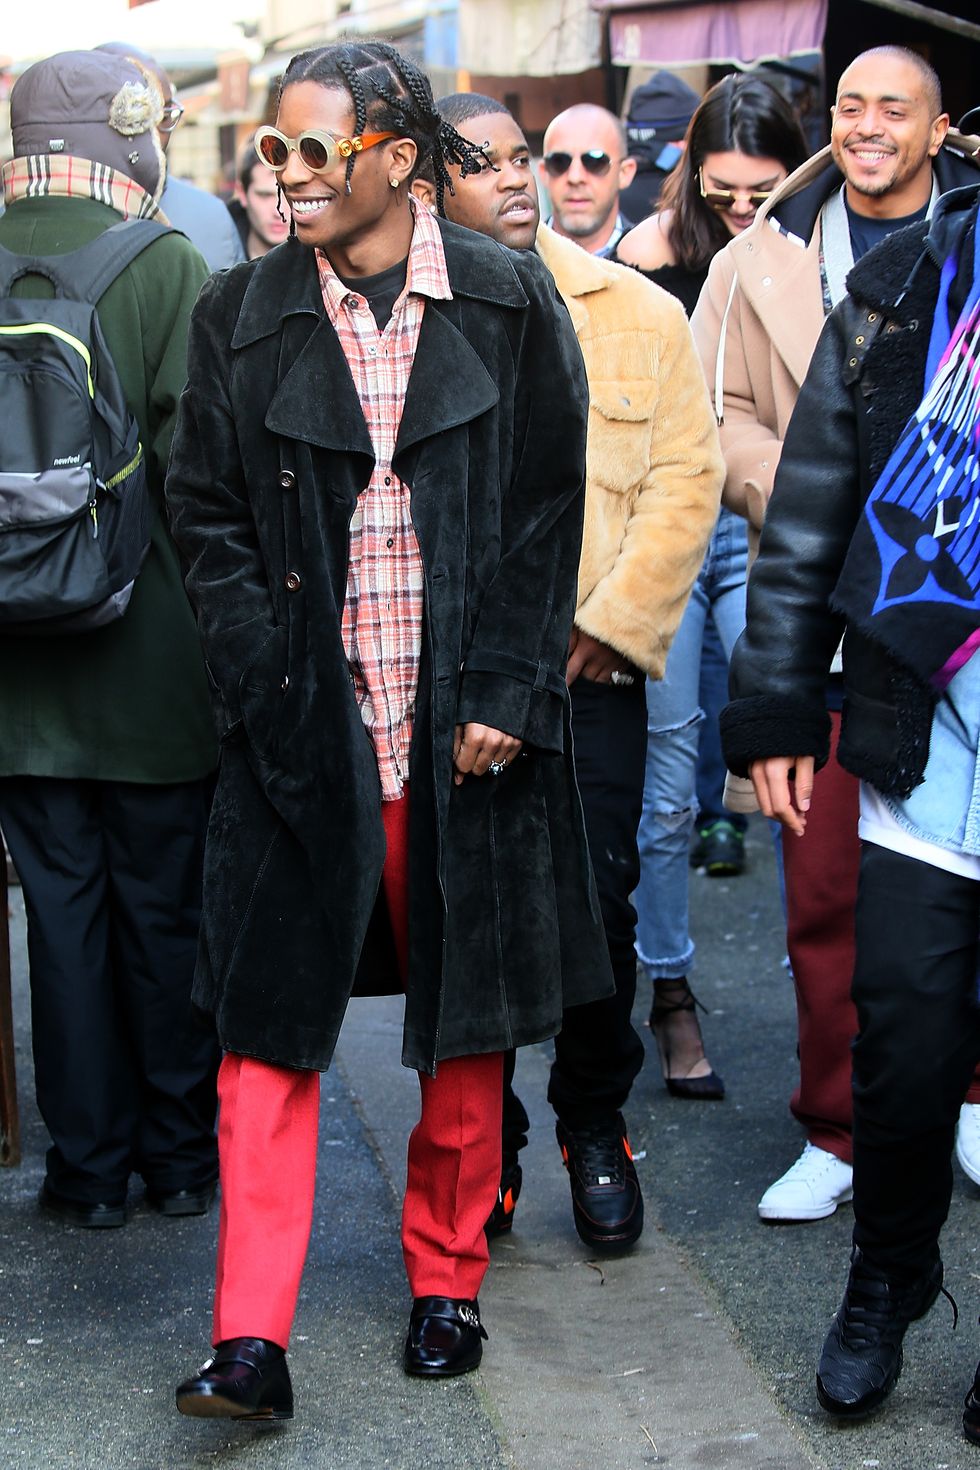 ASAP Rocky sets the bar for modern menswear in a leather skirt